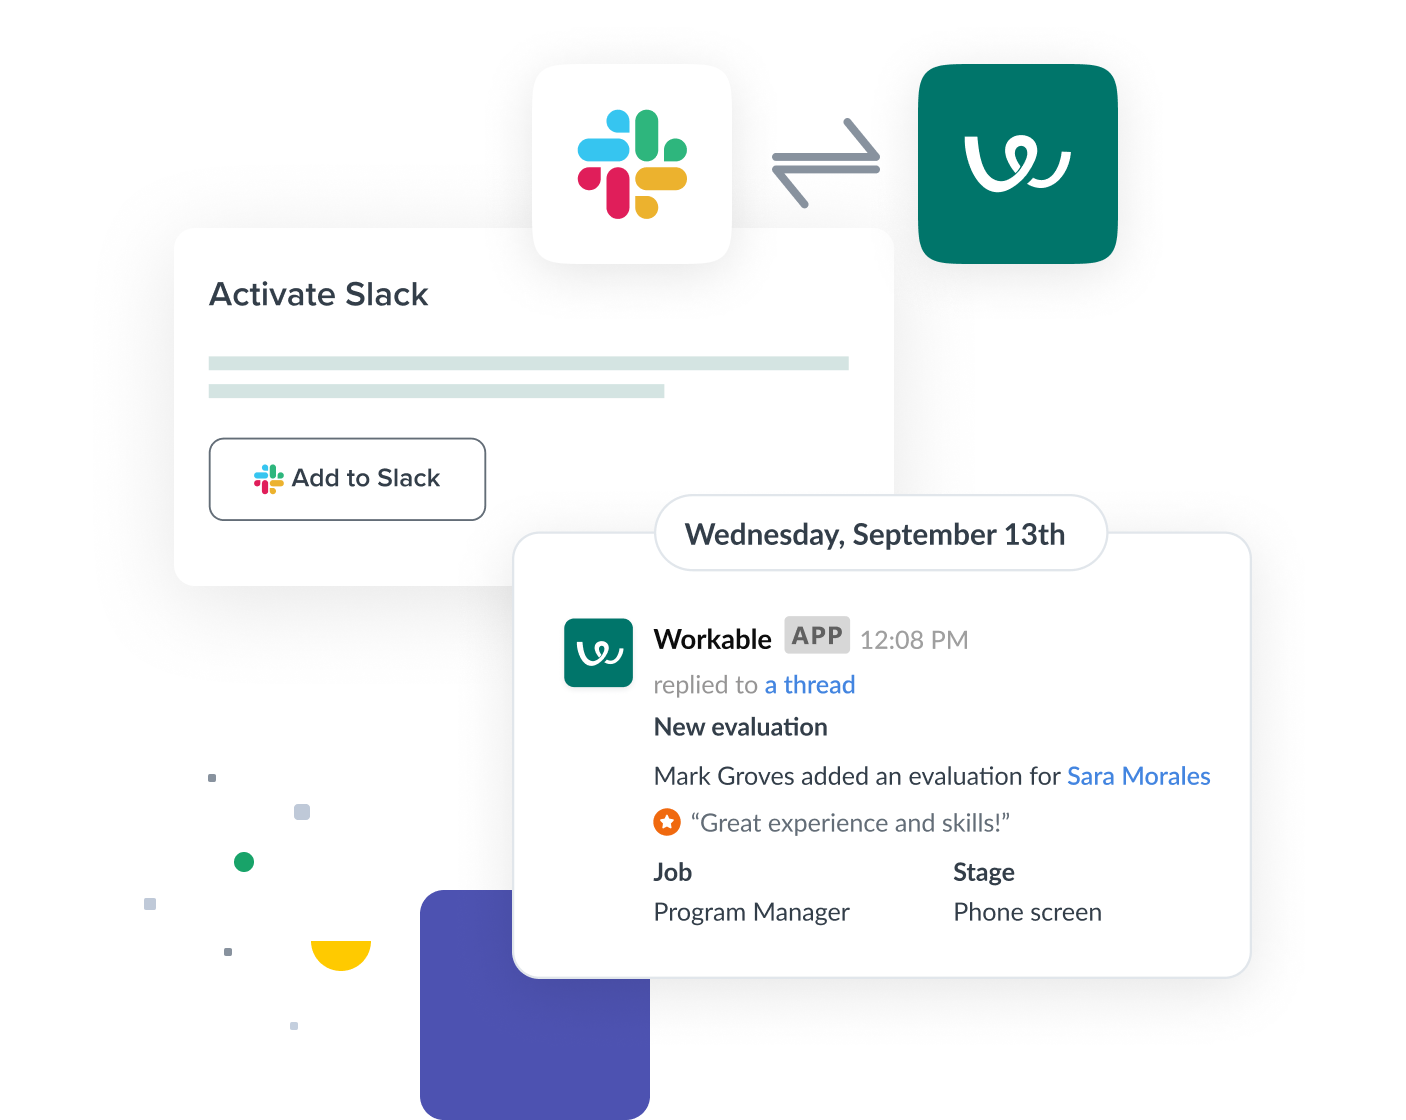 Stay up to date in Slack